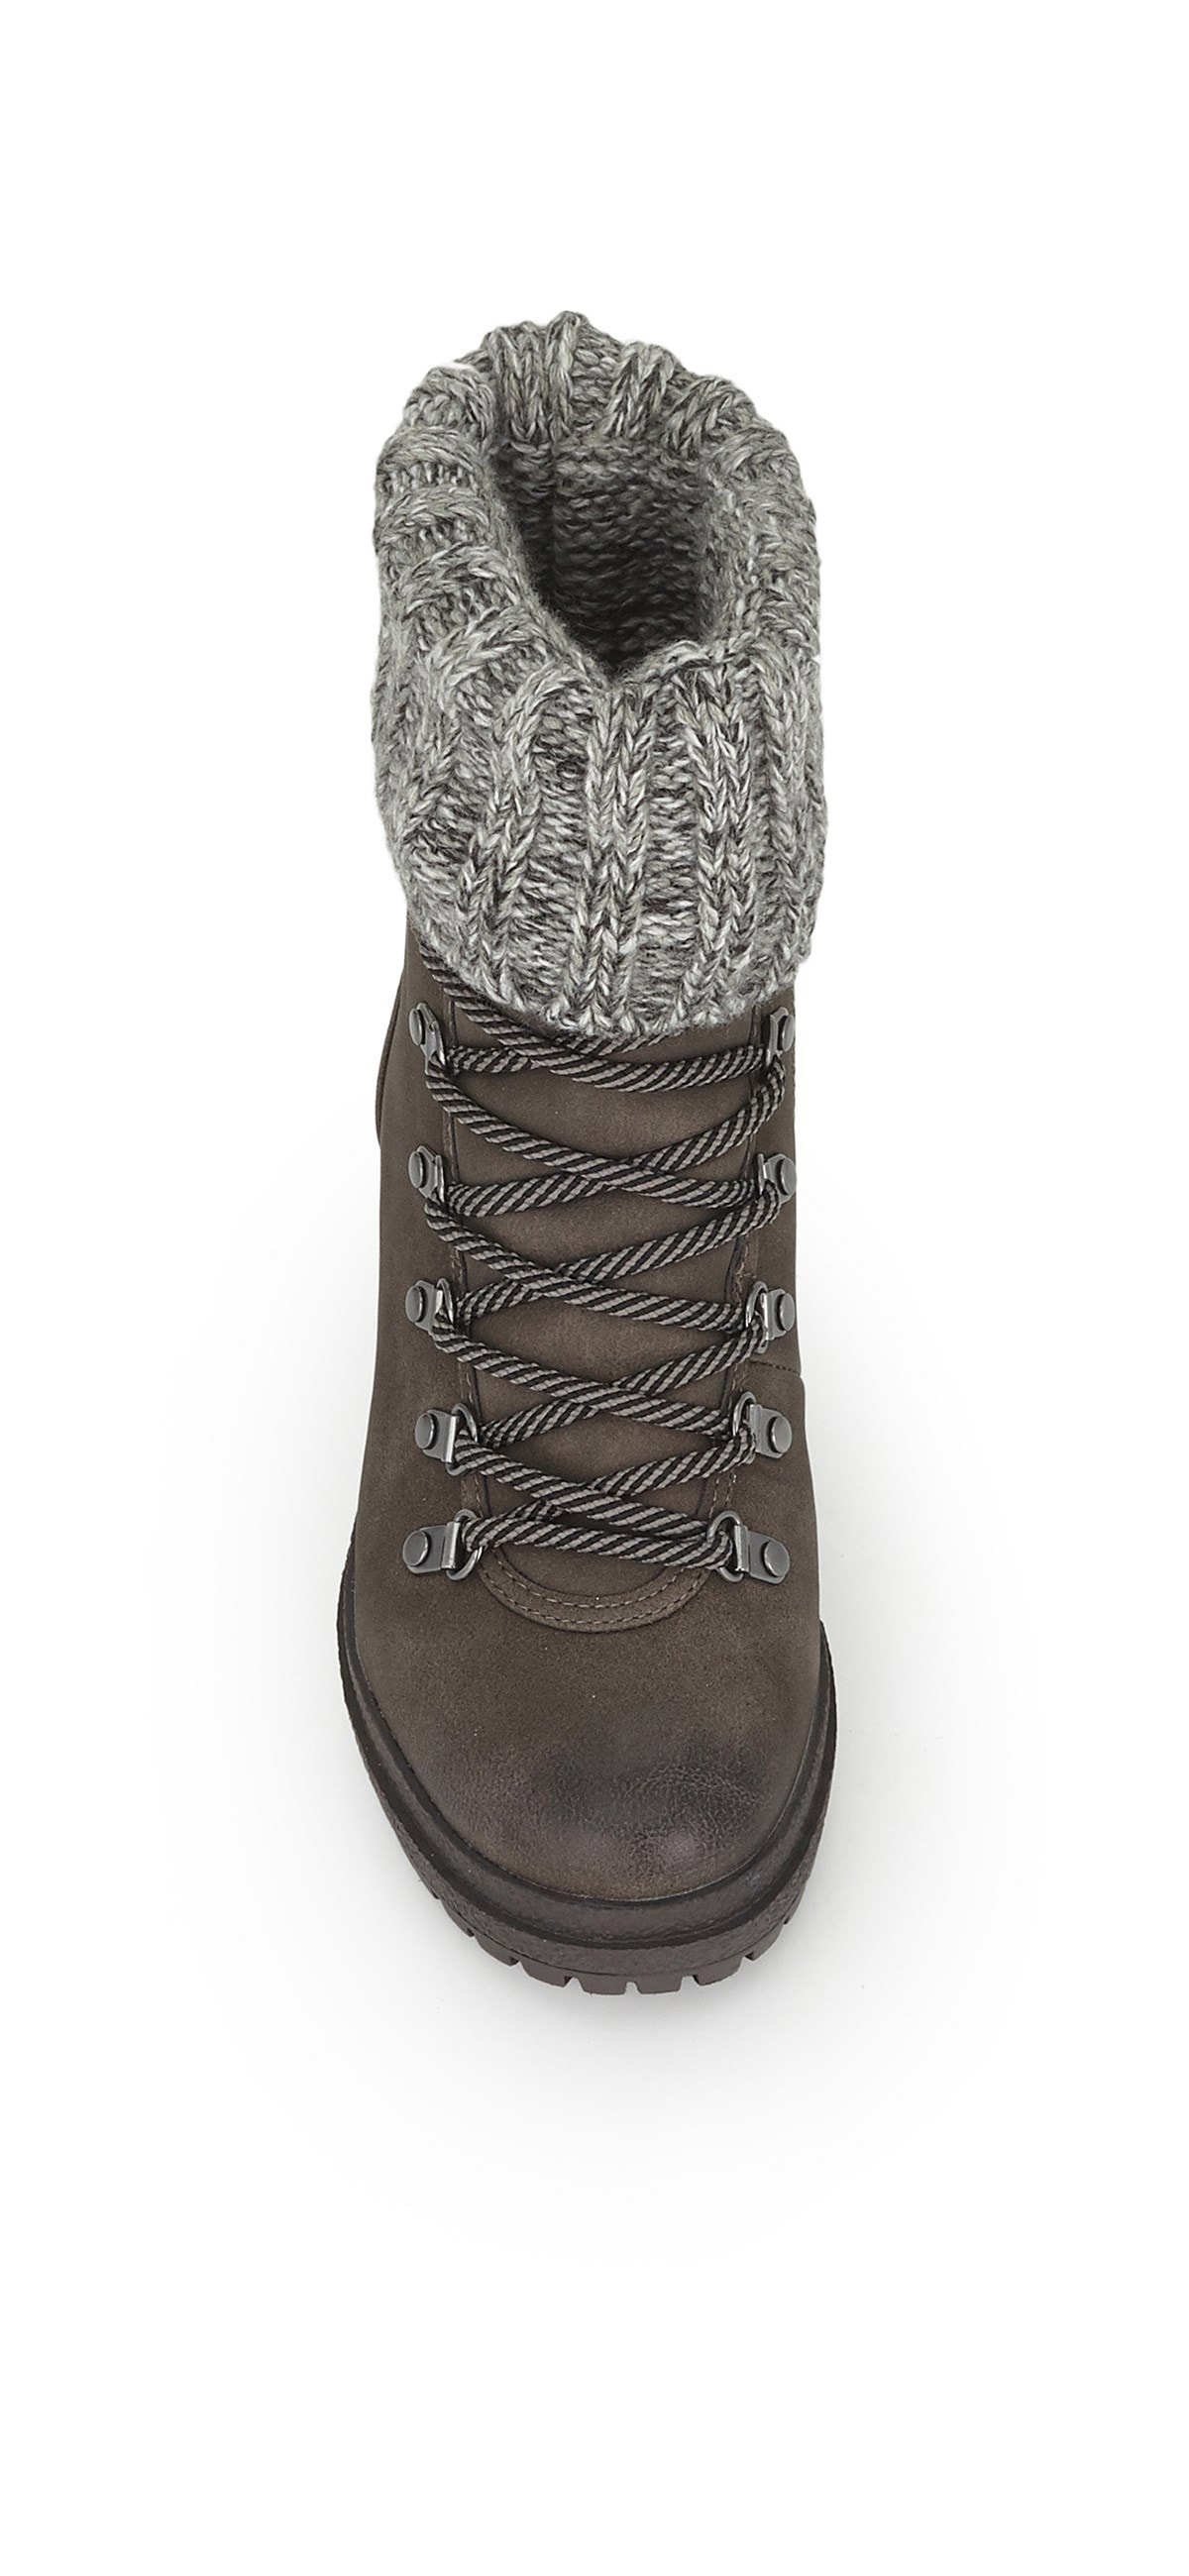 Cardigan Lace Up Knit Bootie | Circus by Sam Edelman